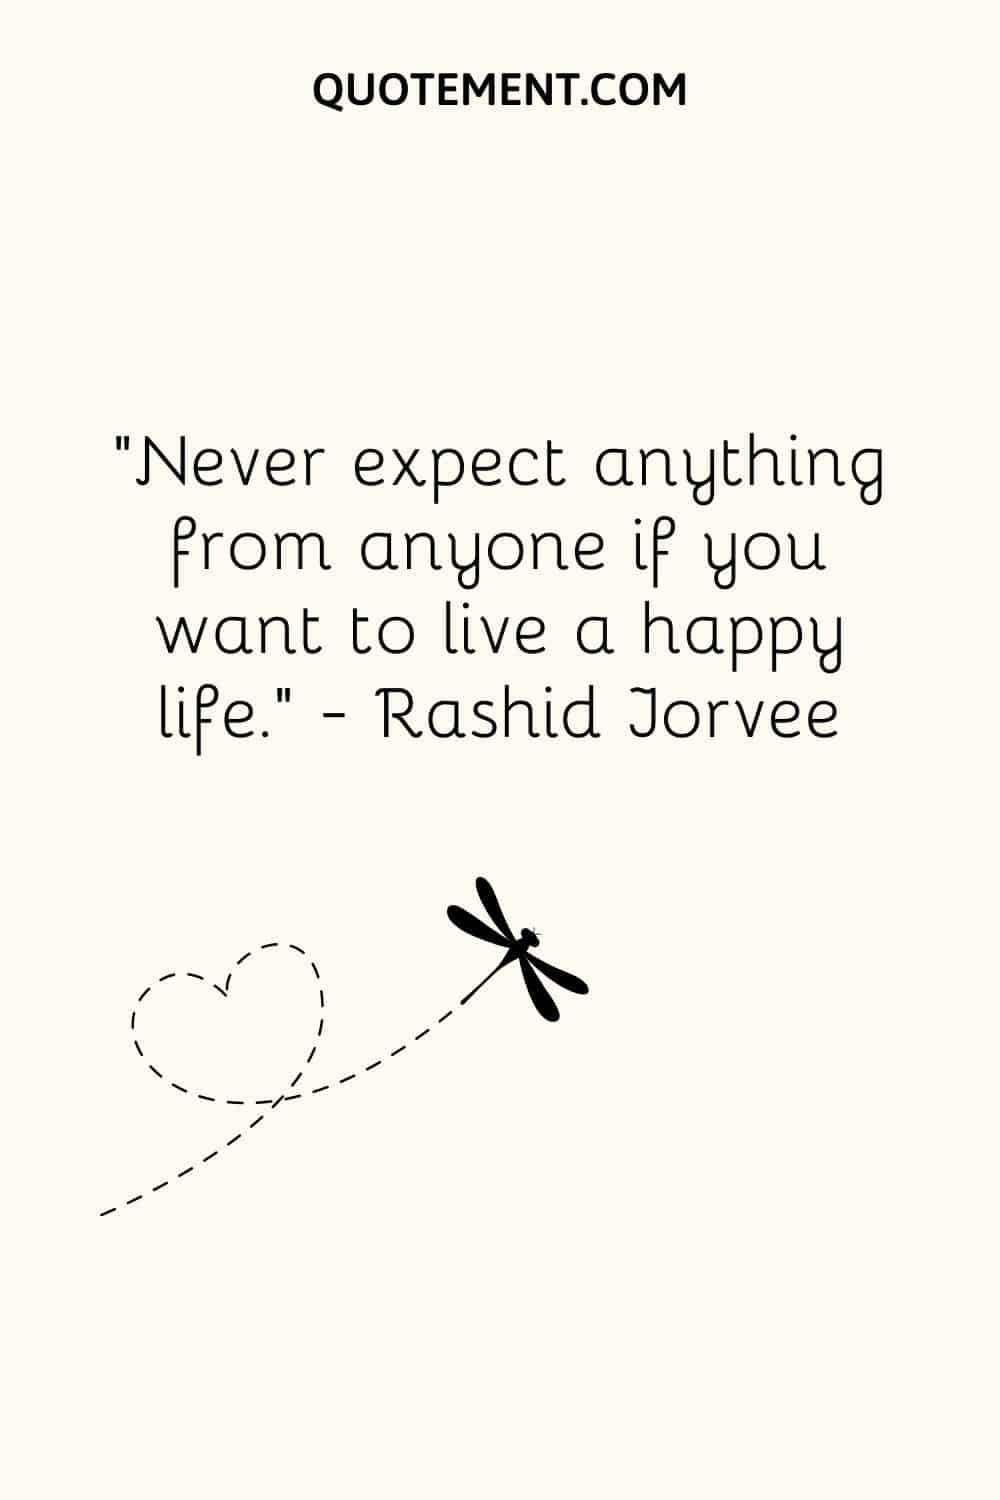 Never expect anything from anyone if you want to live a happy life